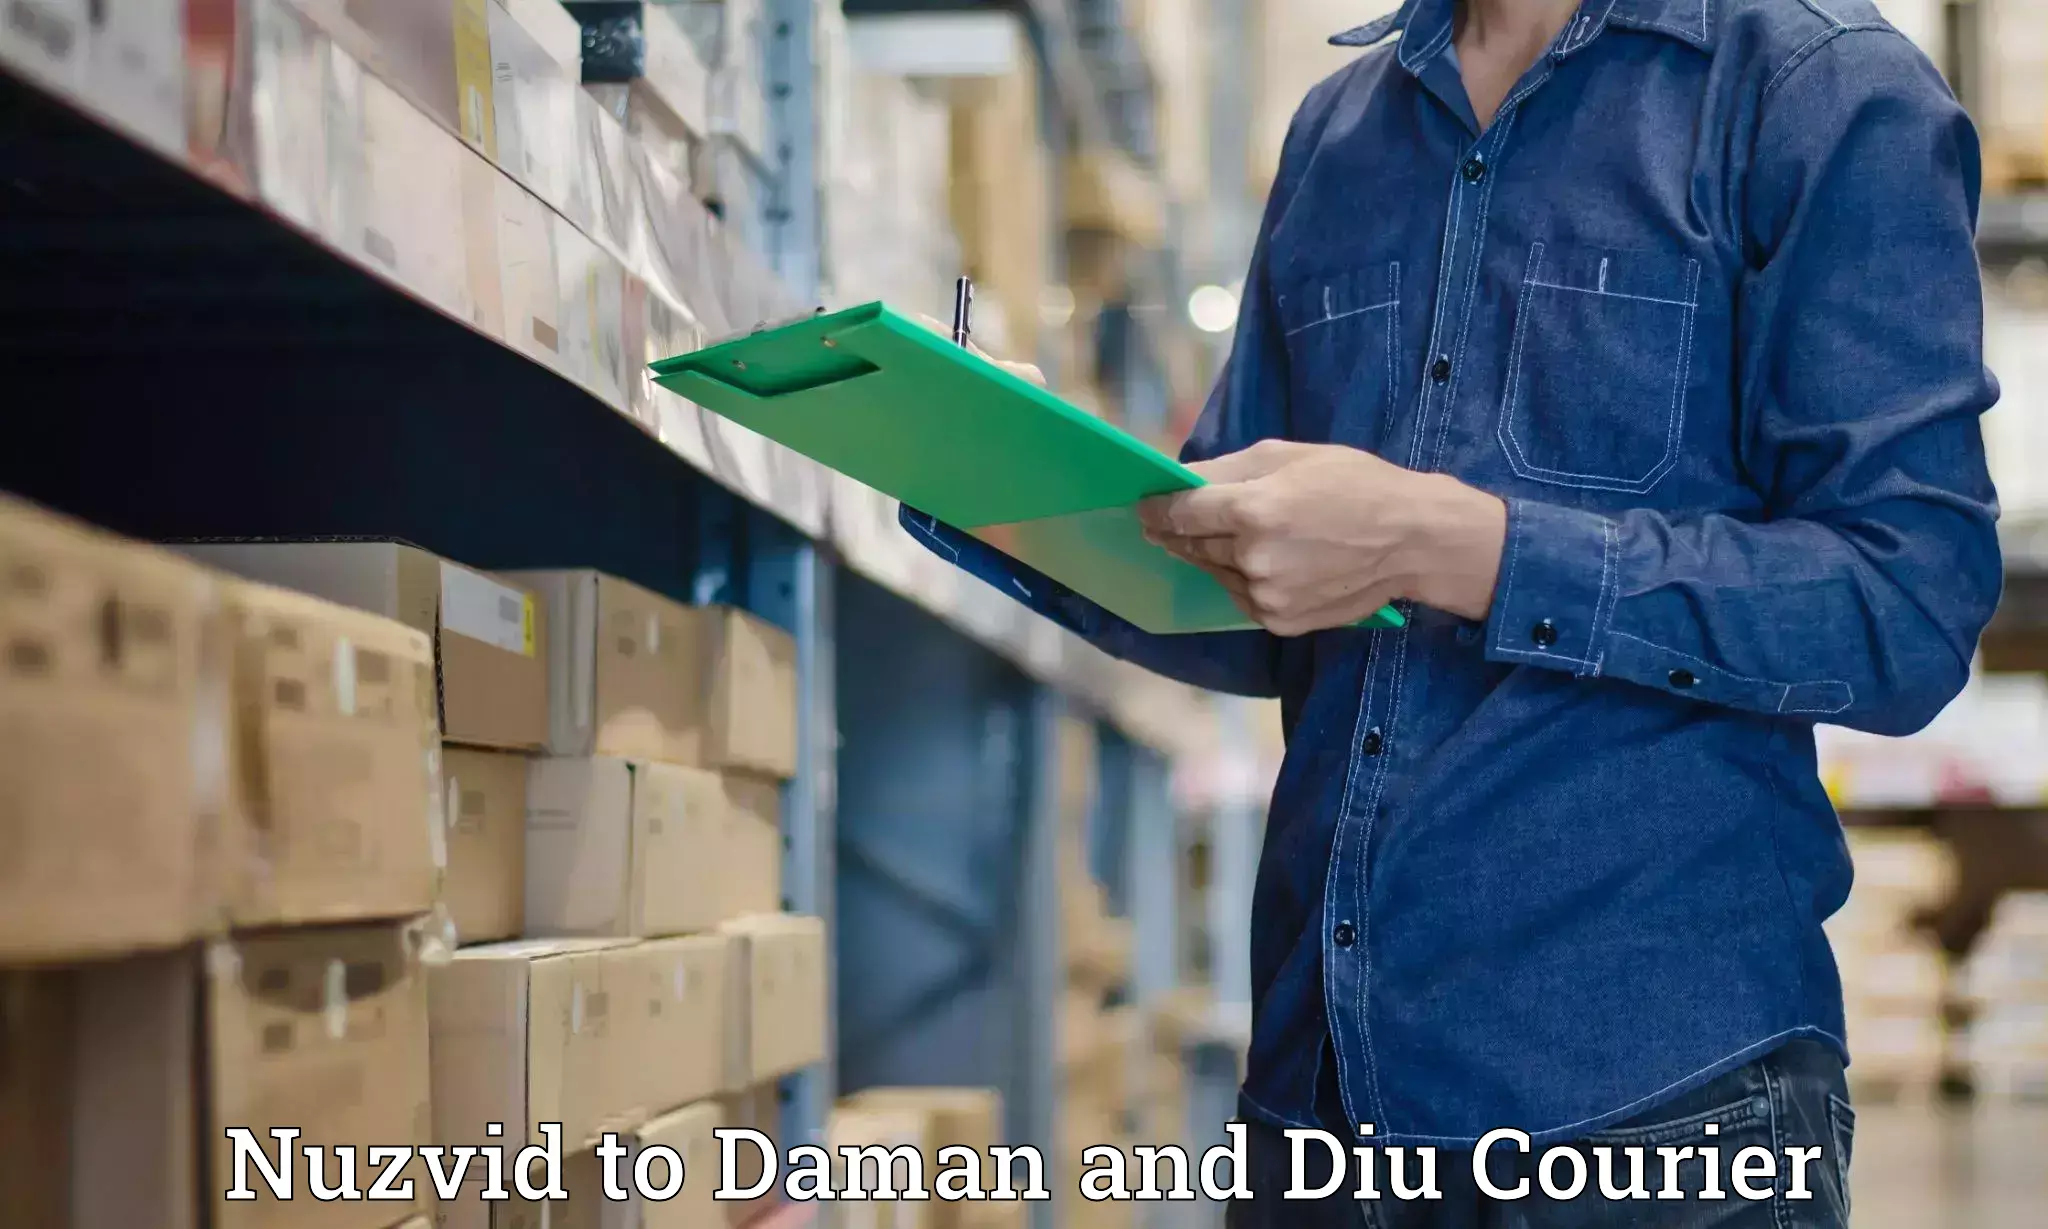 Next-day delivery options Nuzvid to Daman and Diu